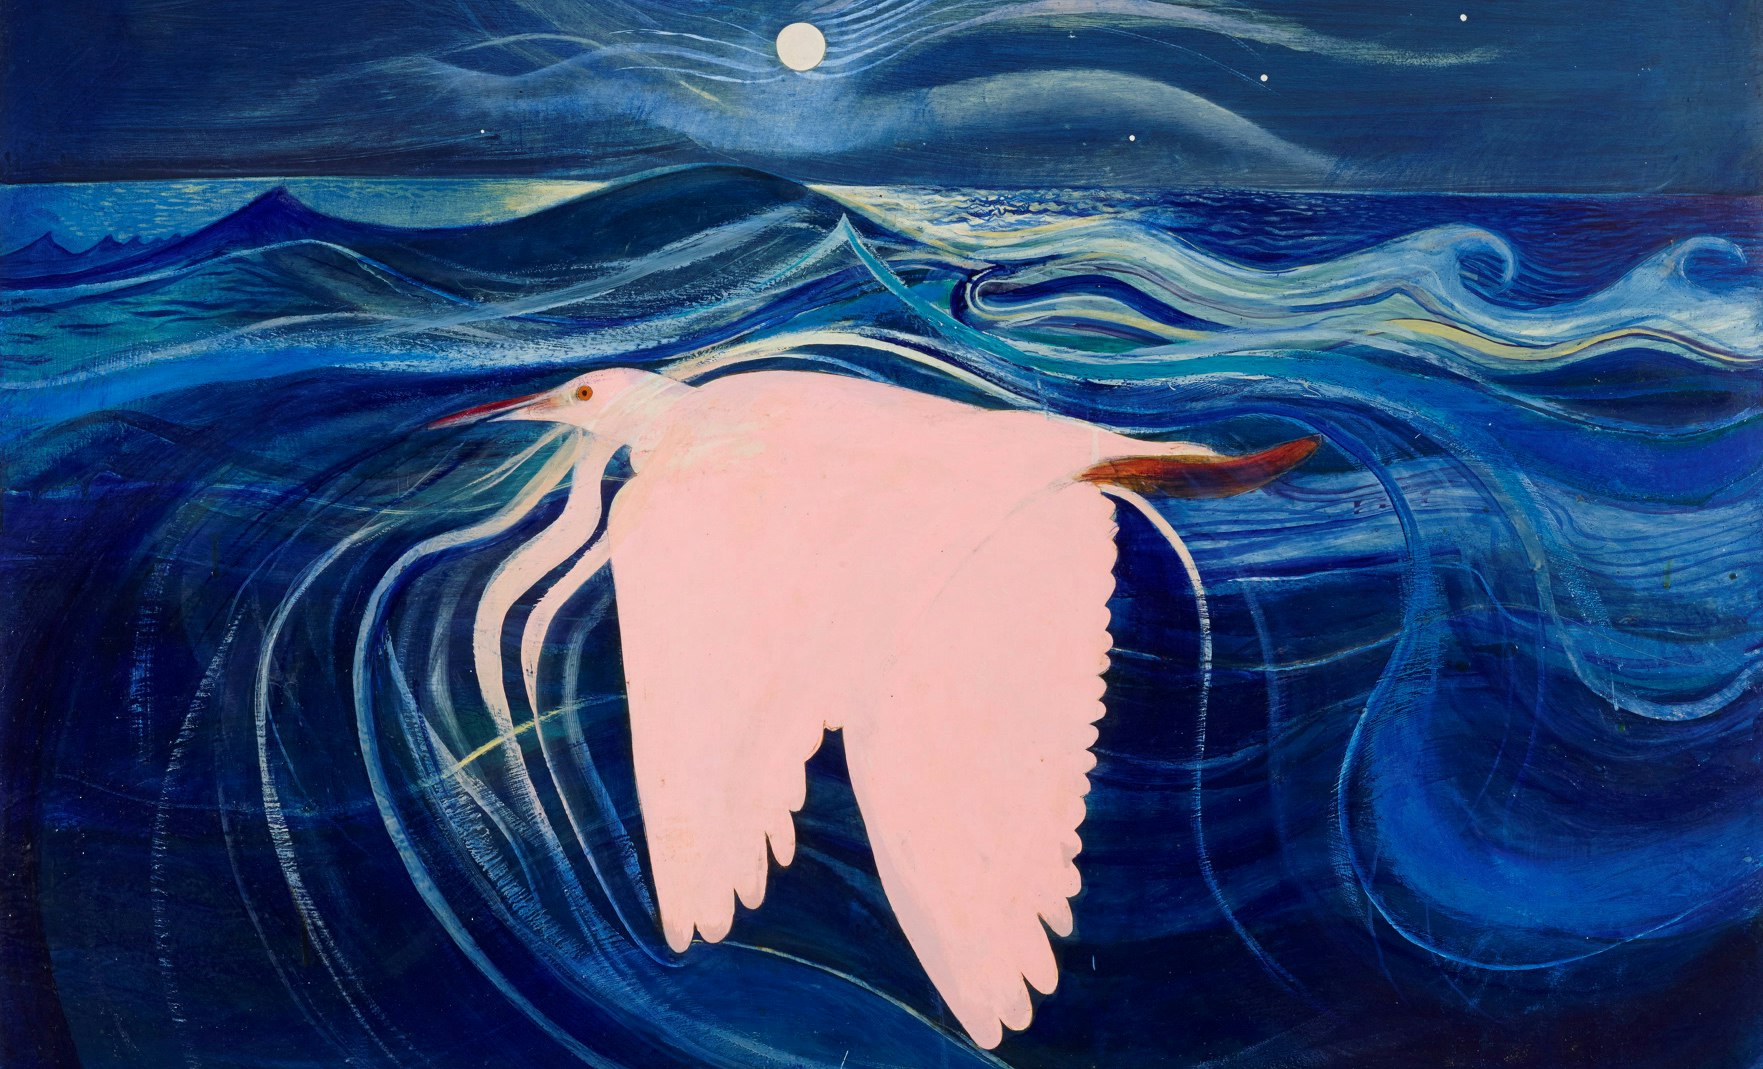 A bird flies over waves with a distant full moon